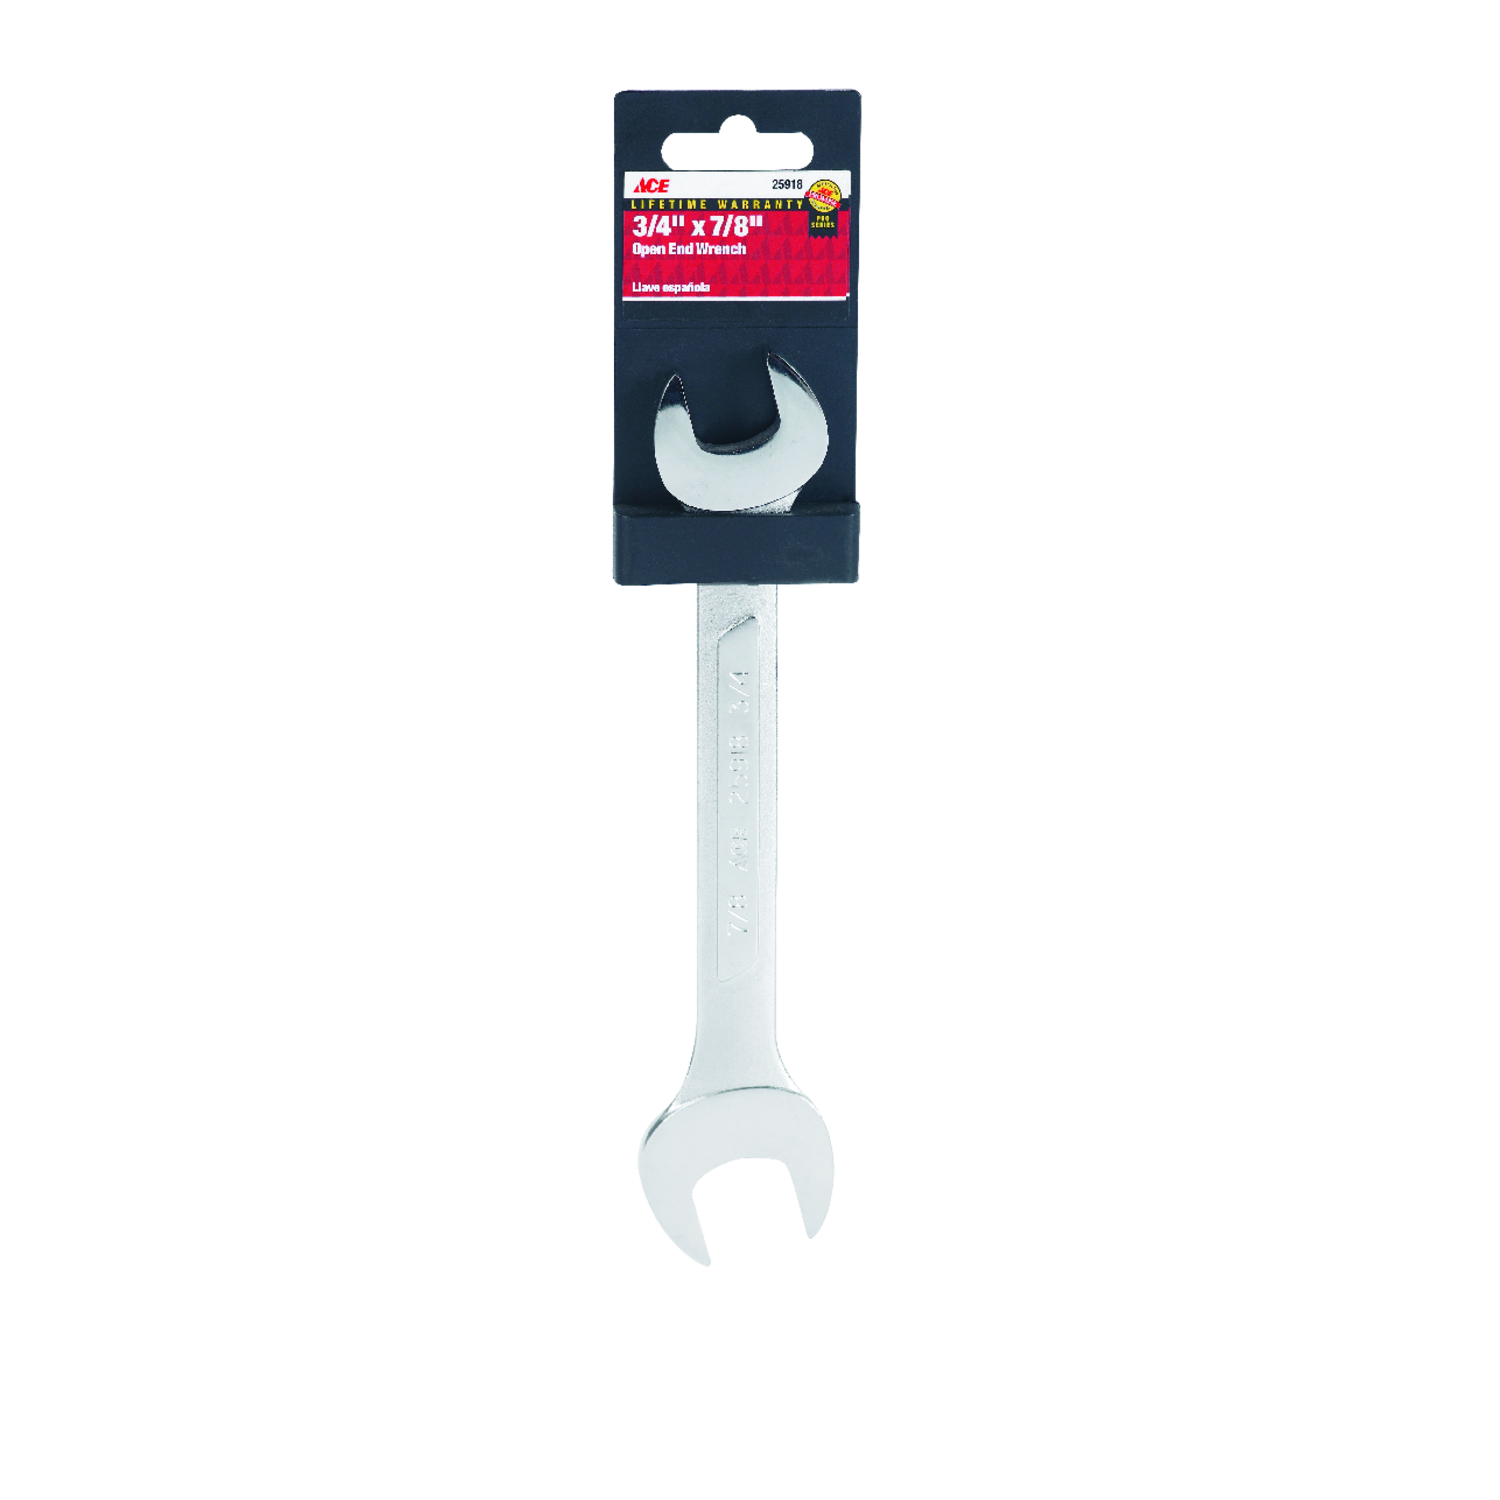 Ace Pro Series 3/4 in. X 7/8 in. SAE Open End Wrench 10 in. L 1 pc -  25918